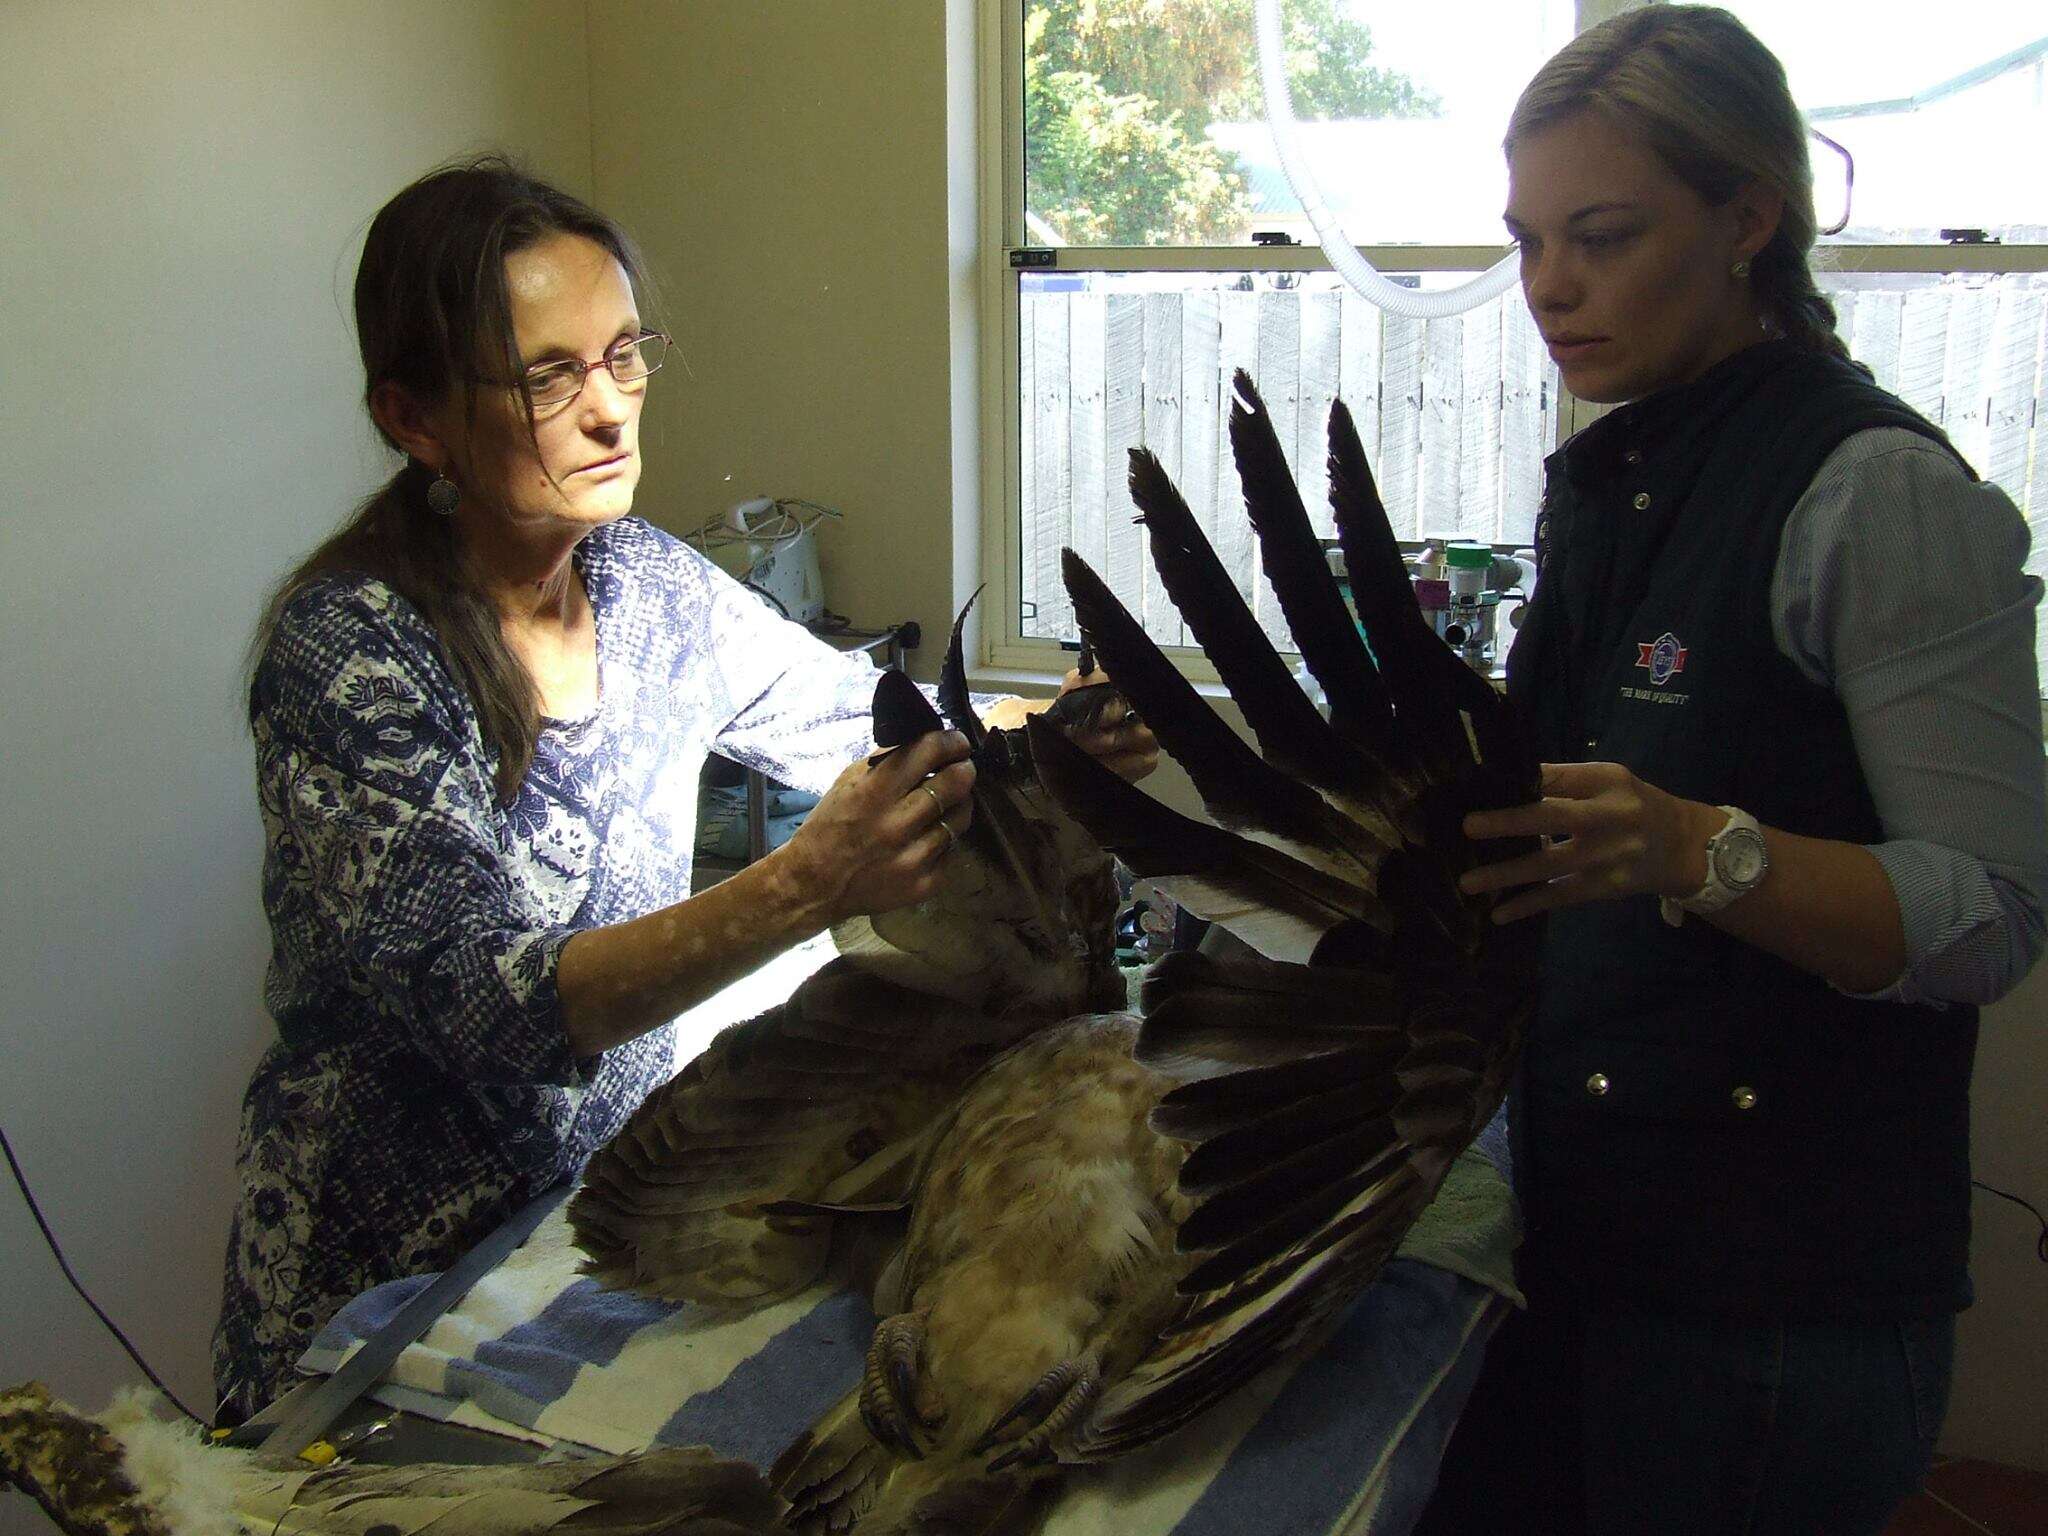 People helping eagle with mangled wing